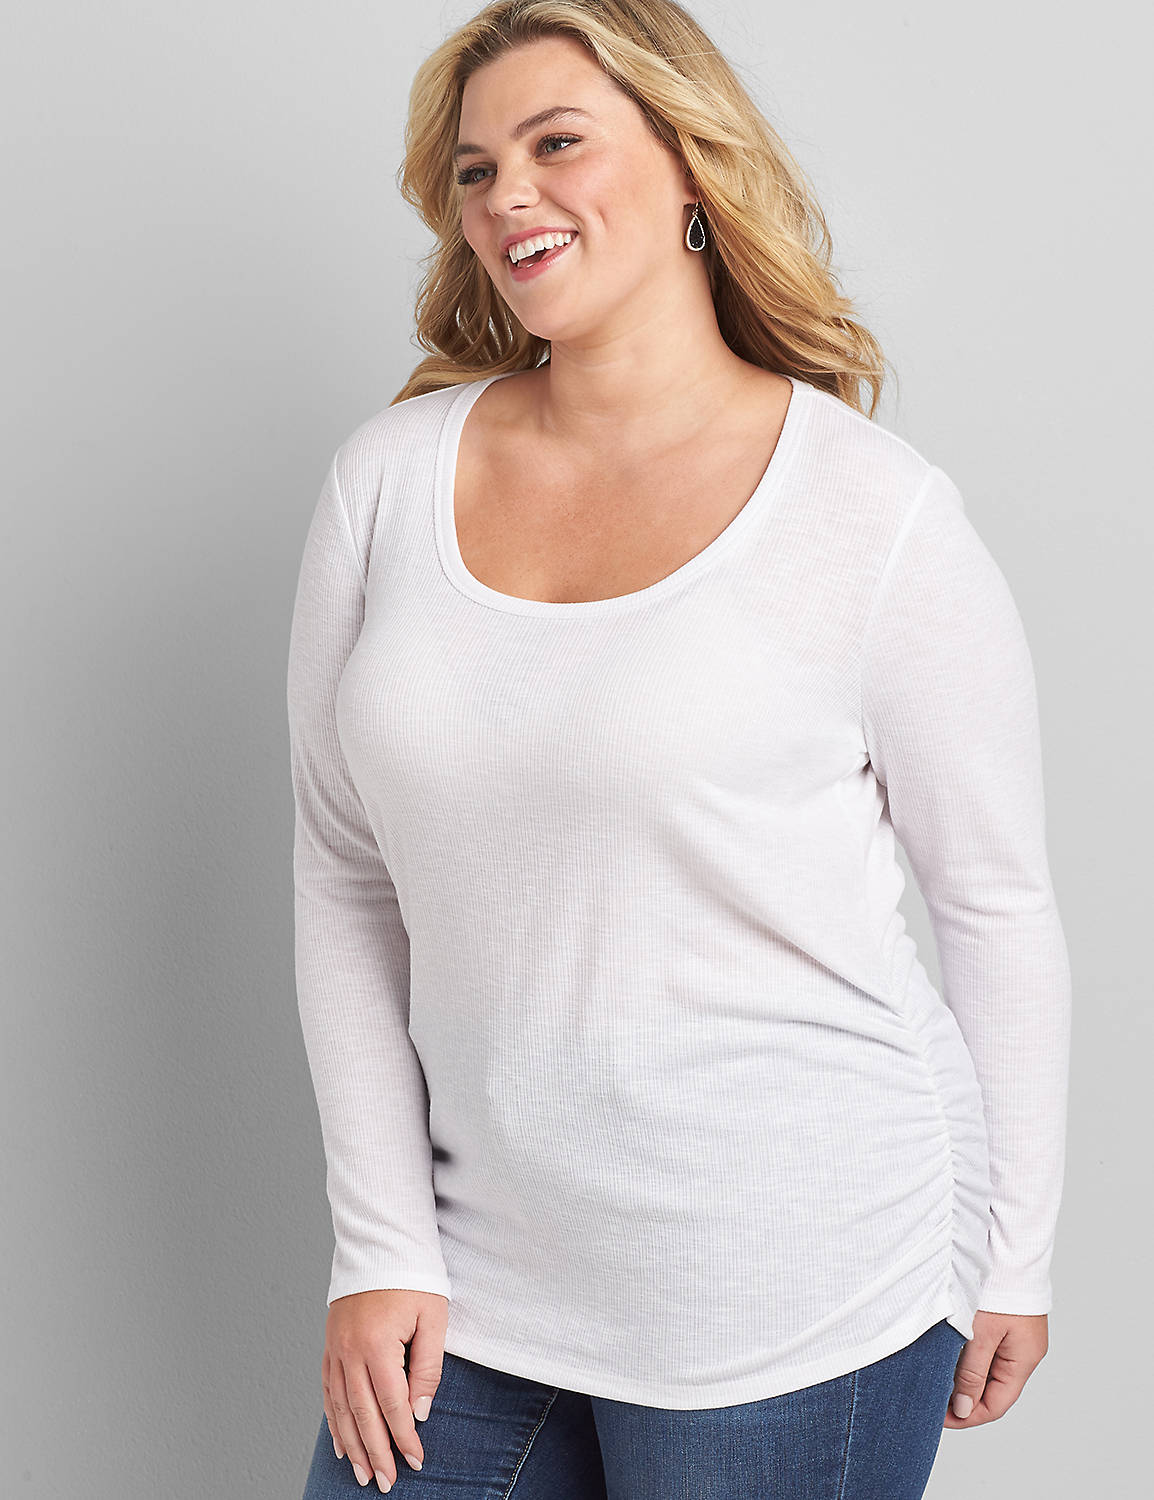 Long-Sleeve Ribbed Ruched Side Tee Product Image 1